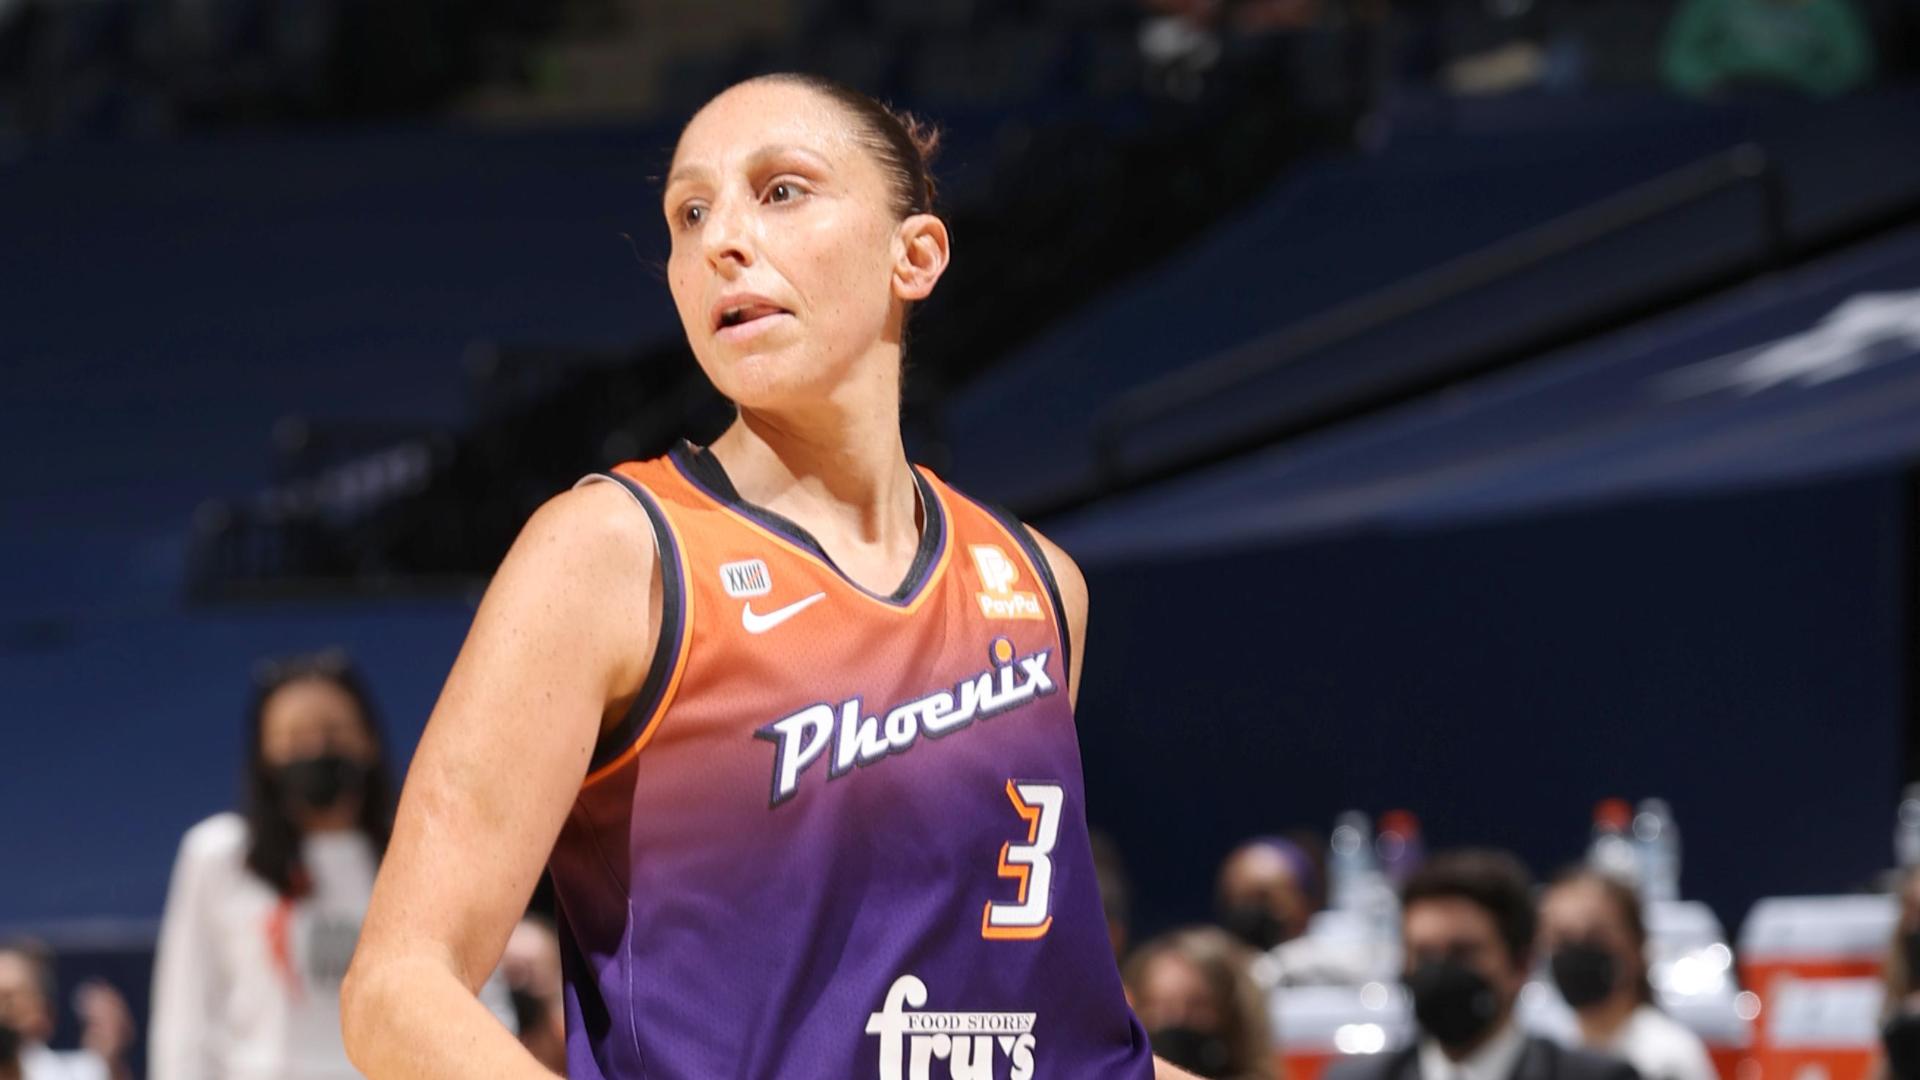 Taurasi hits game winner for Mercury with 1.1 seconds left